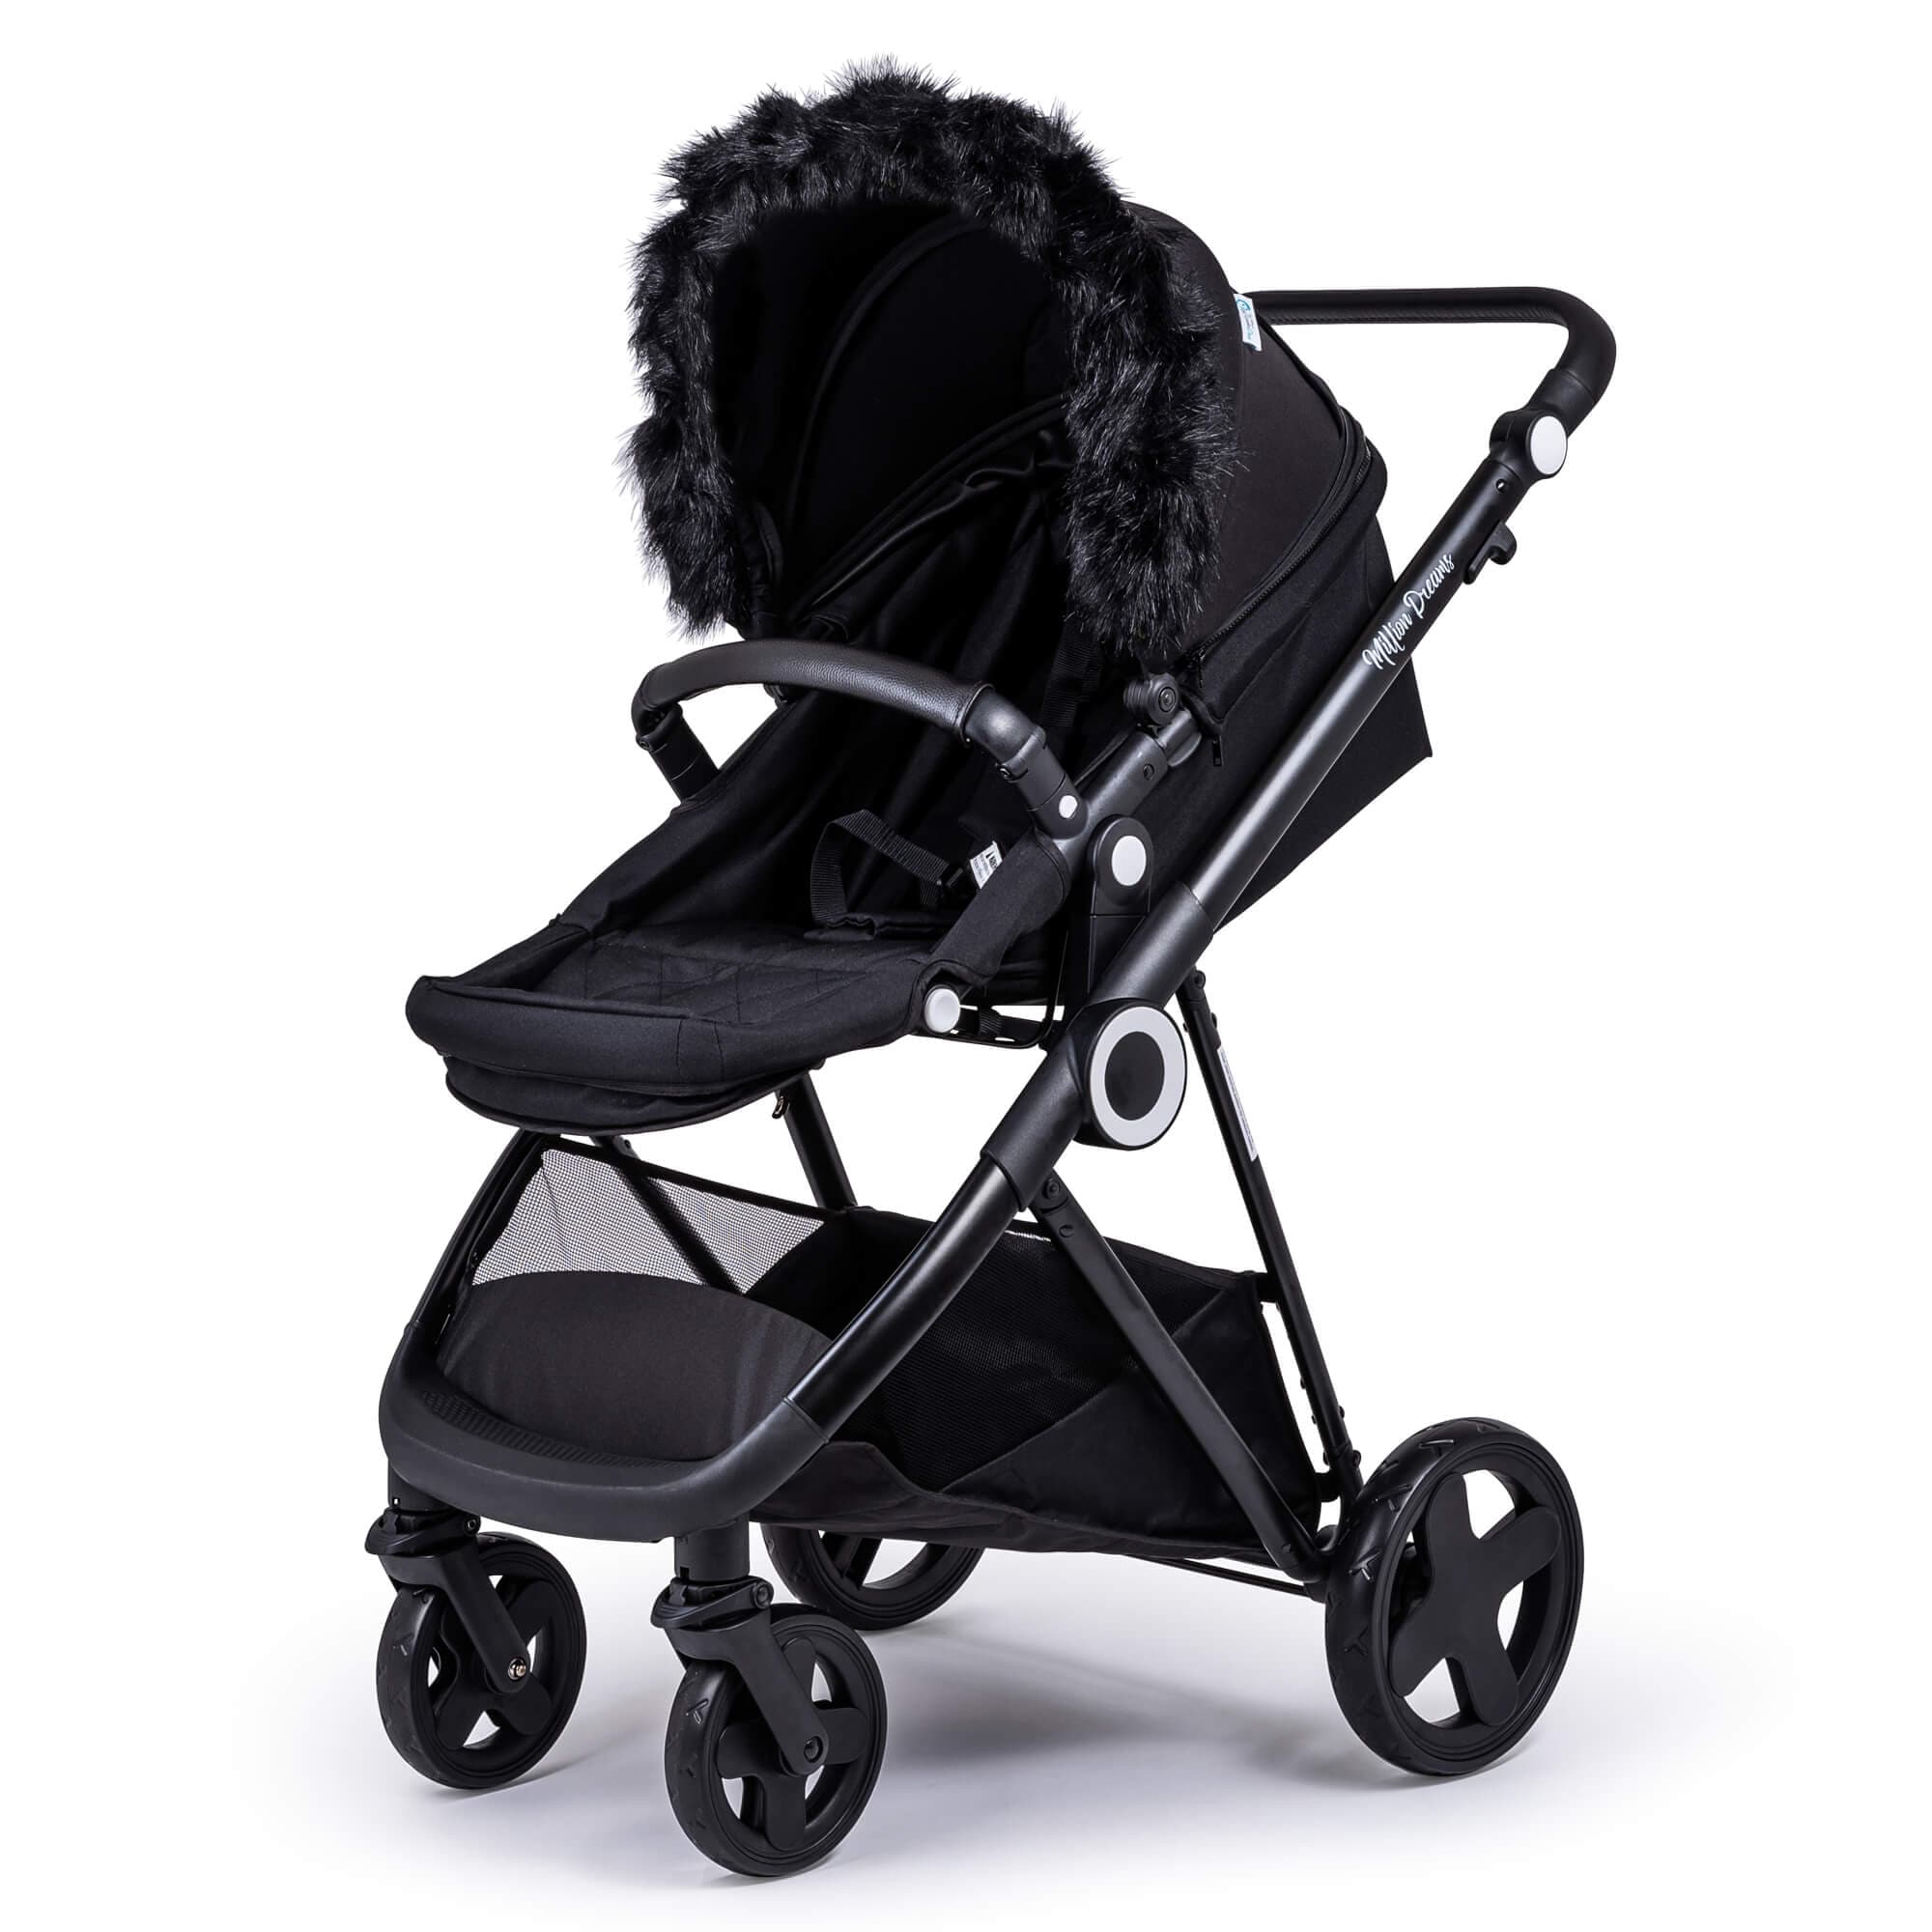 Pram Fur Hood Trim Attachment for Pushchair Compatible with Urban Detour - Black / Fits All Models | For Your Little One